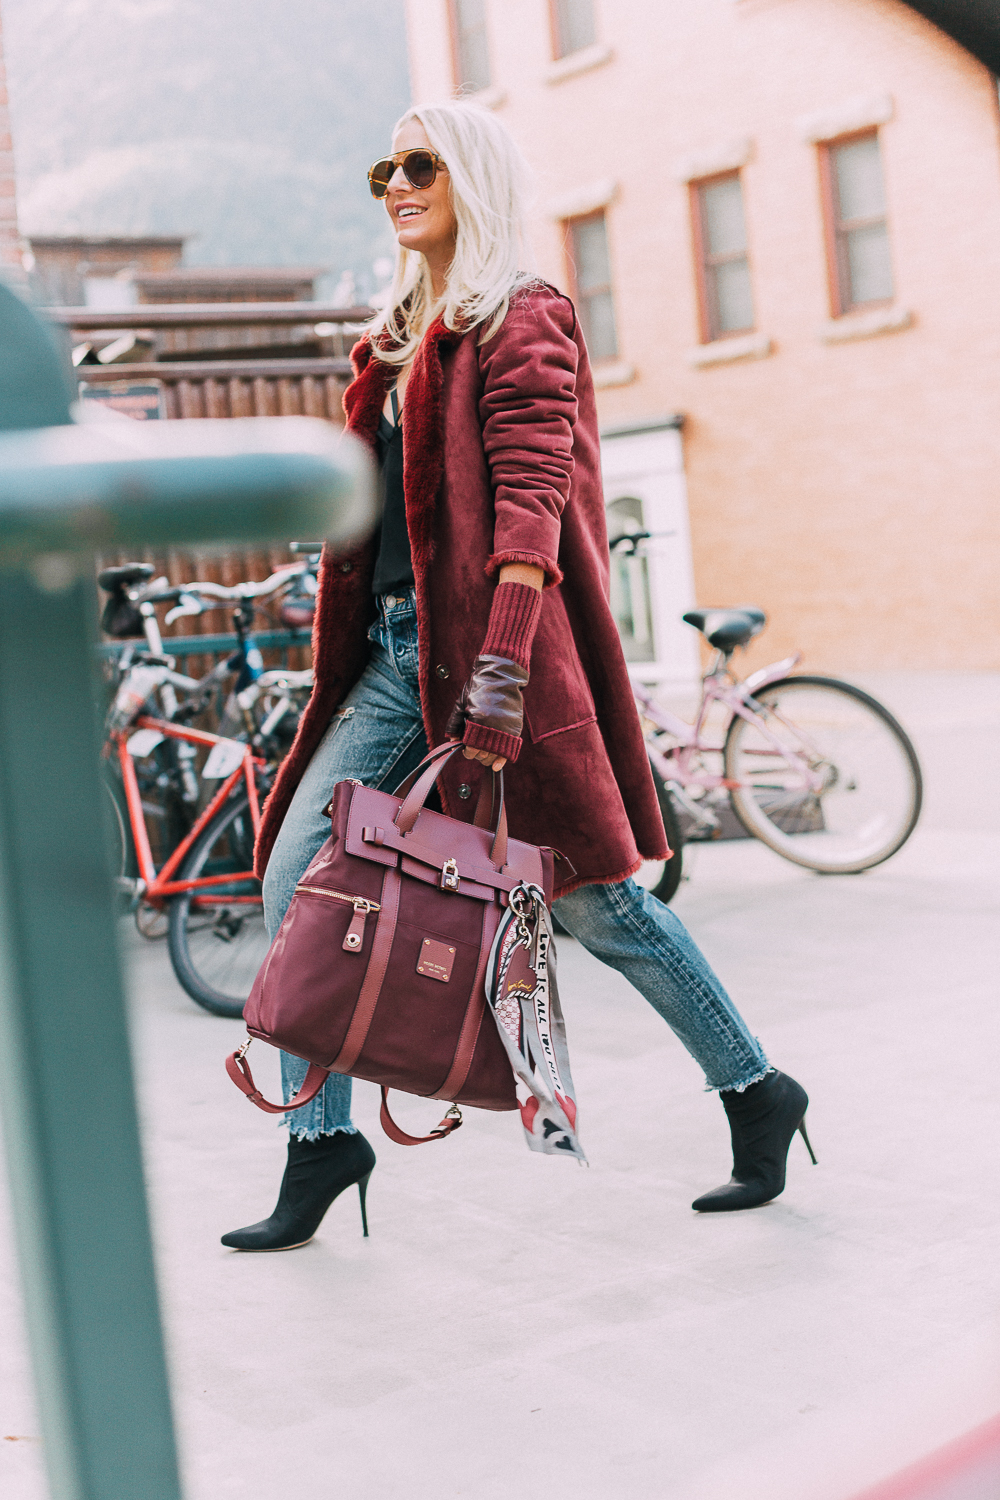 burgundy Jetsetter backpack paired with burgundy plush coat, cropped Moussy jeans, Stuart Weitzman sock booties and fingerless gloves